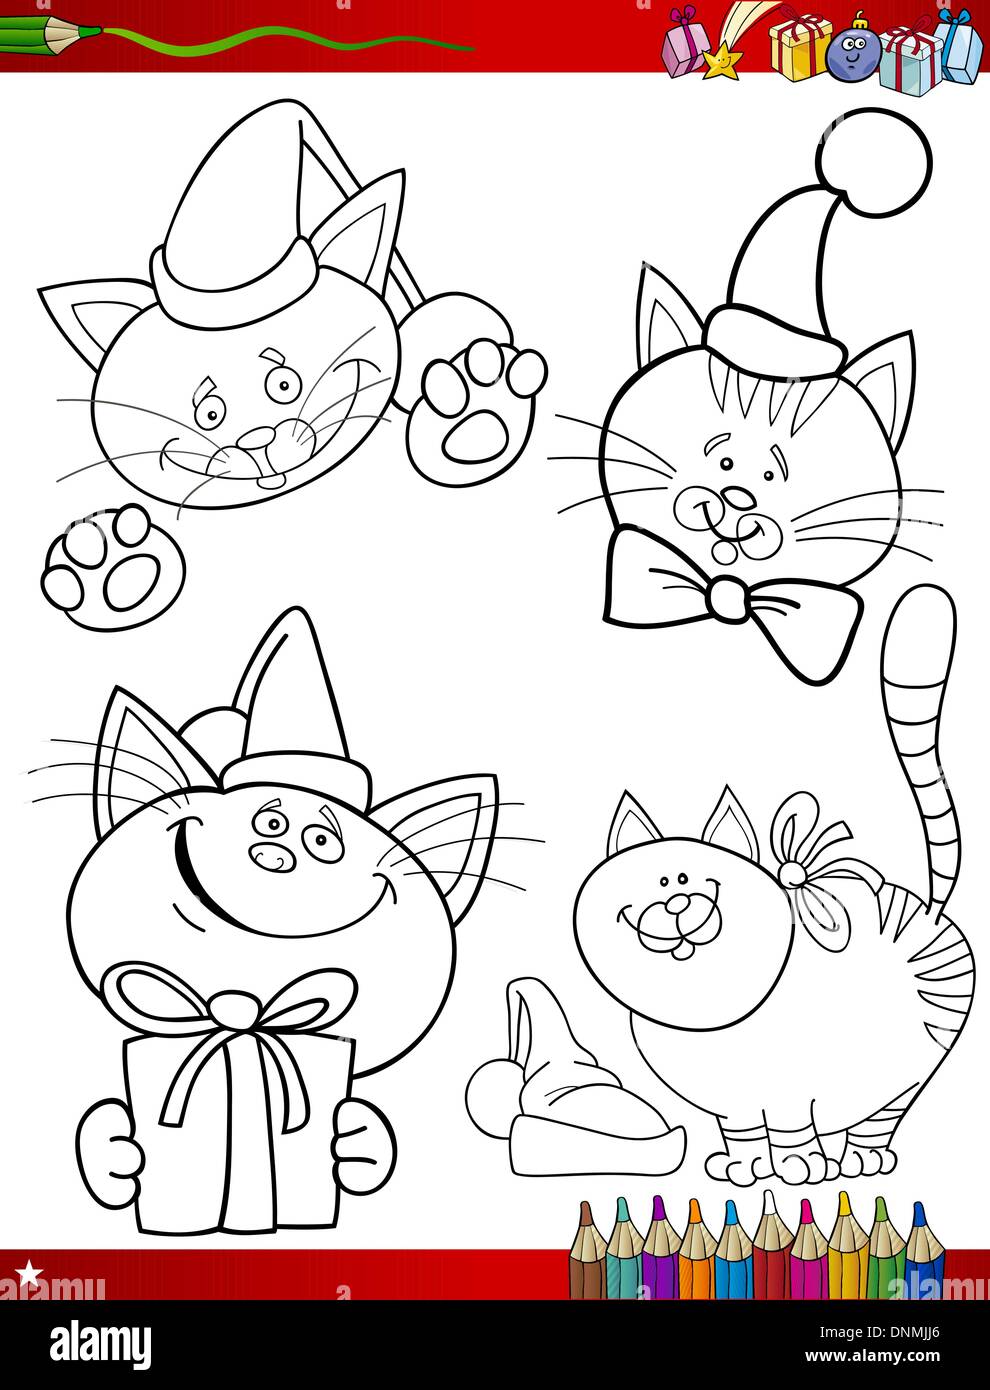 Coloring Book or Page Cartoon Illustration of Black and White Christmas Themes Set with Santa Claus Cats and Xmas Presents and D Stock Vector